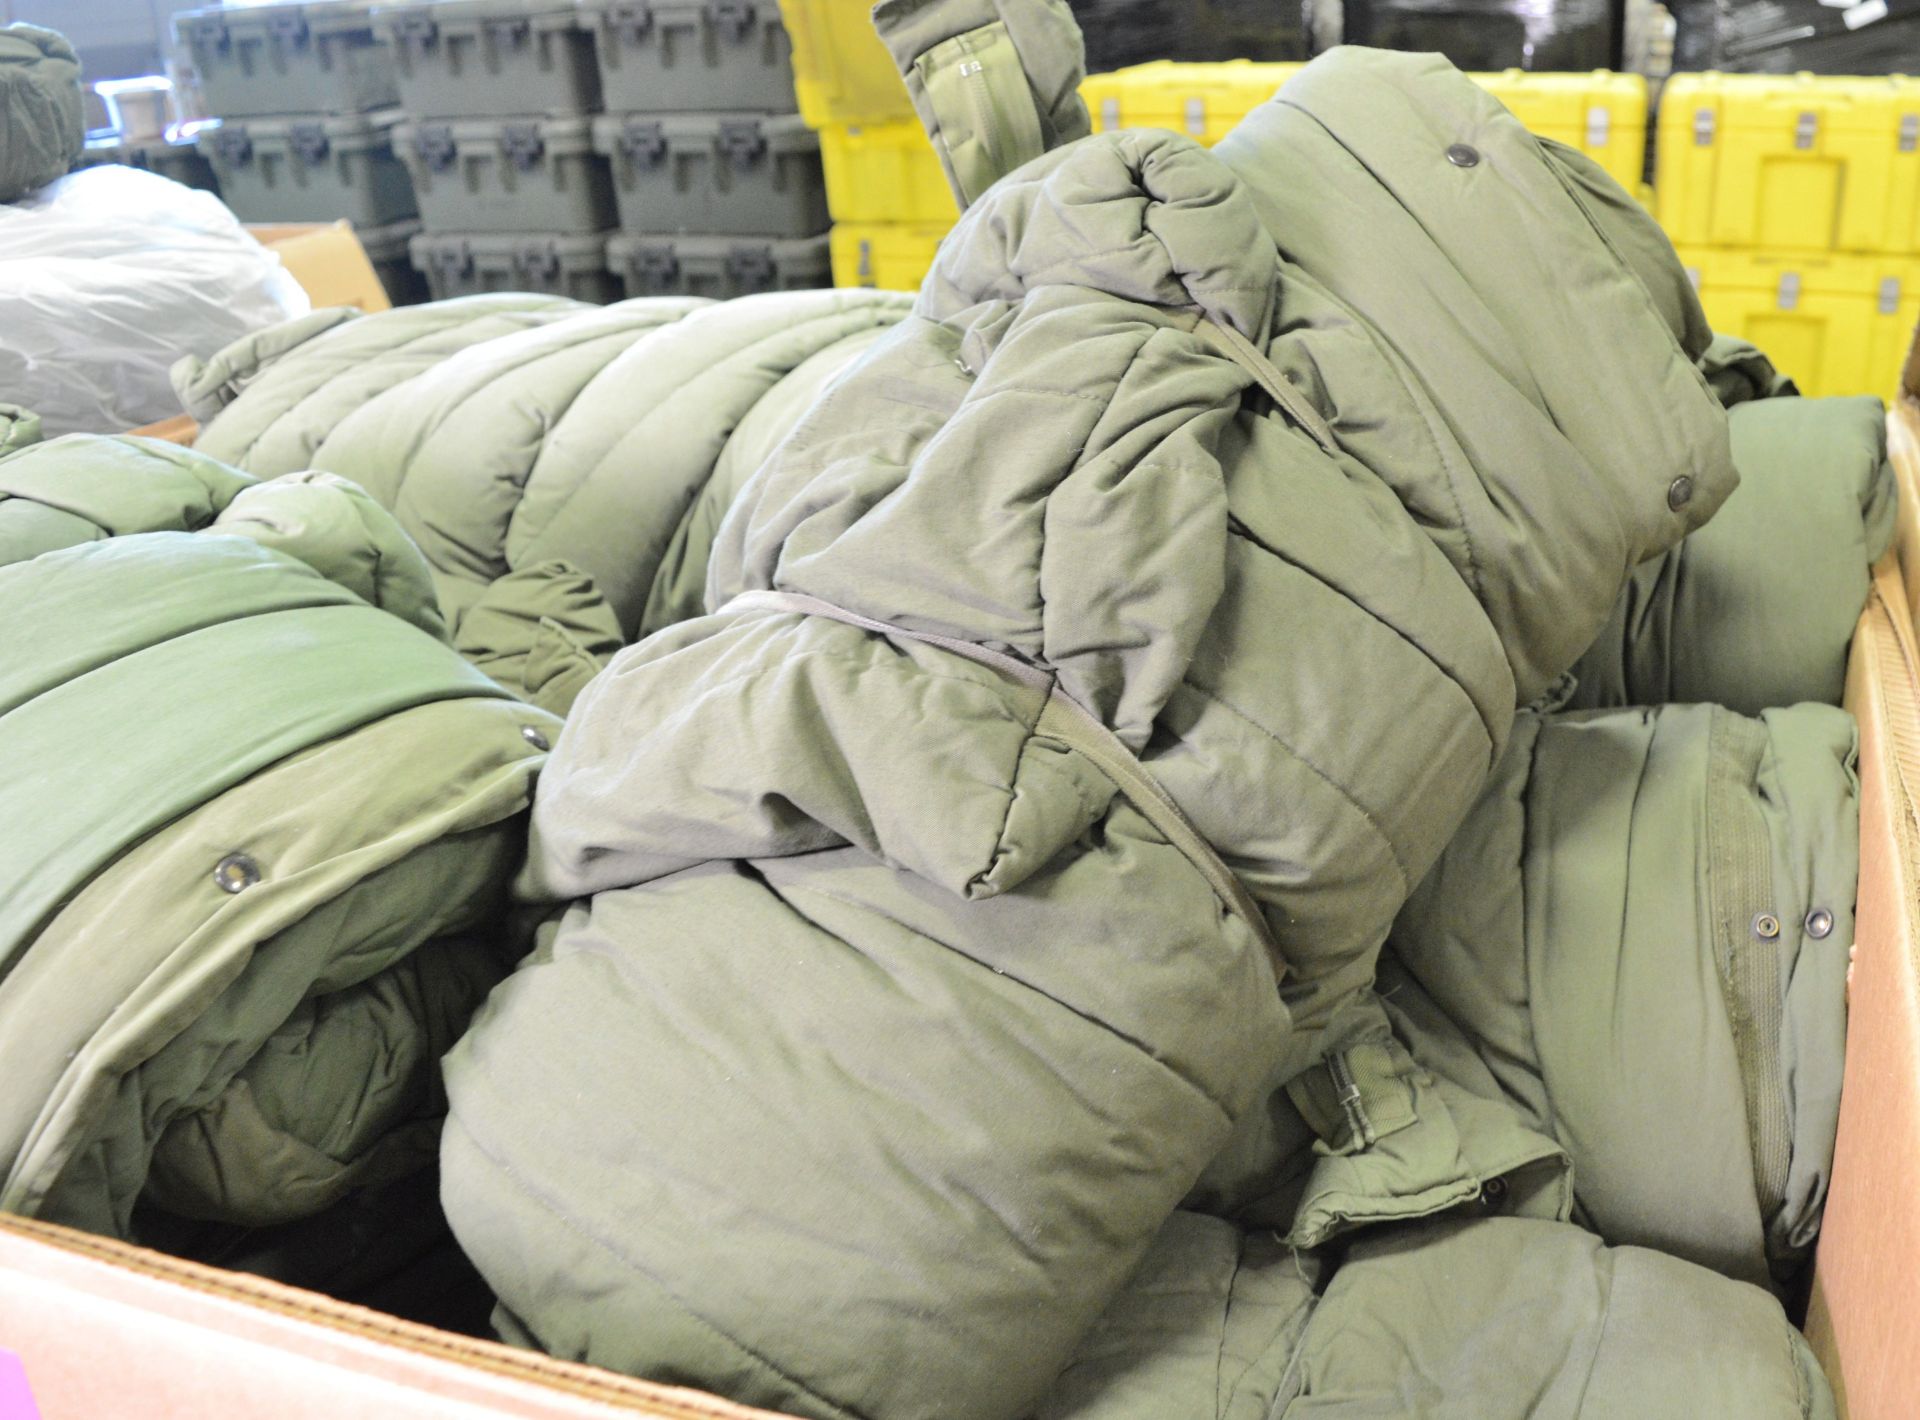 22x Olive Green Military Sleeping Bags. - Image 2 of 2